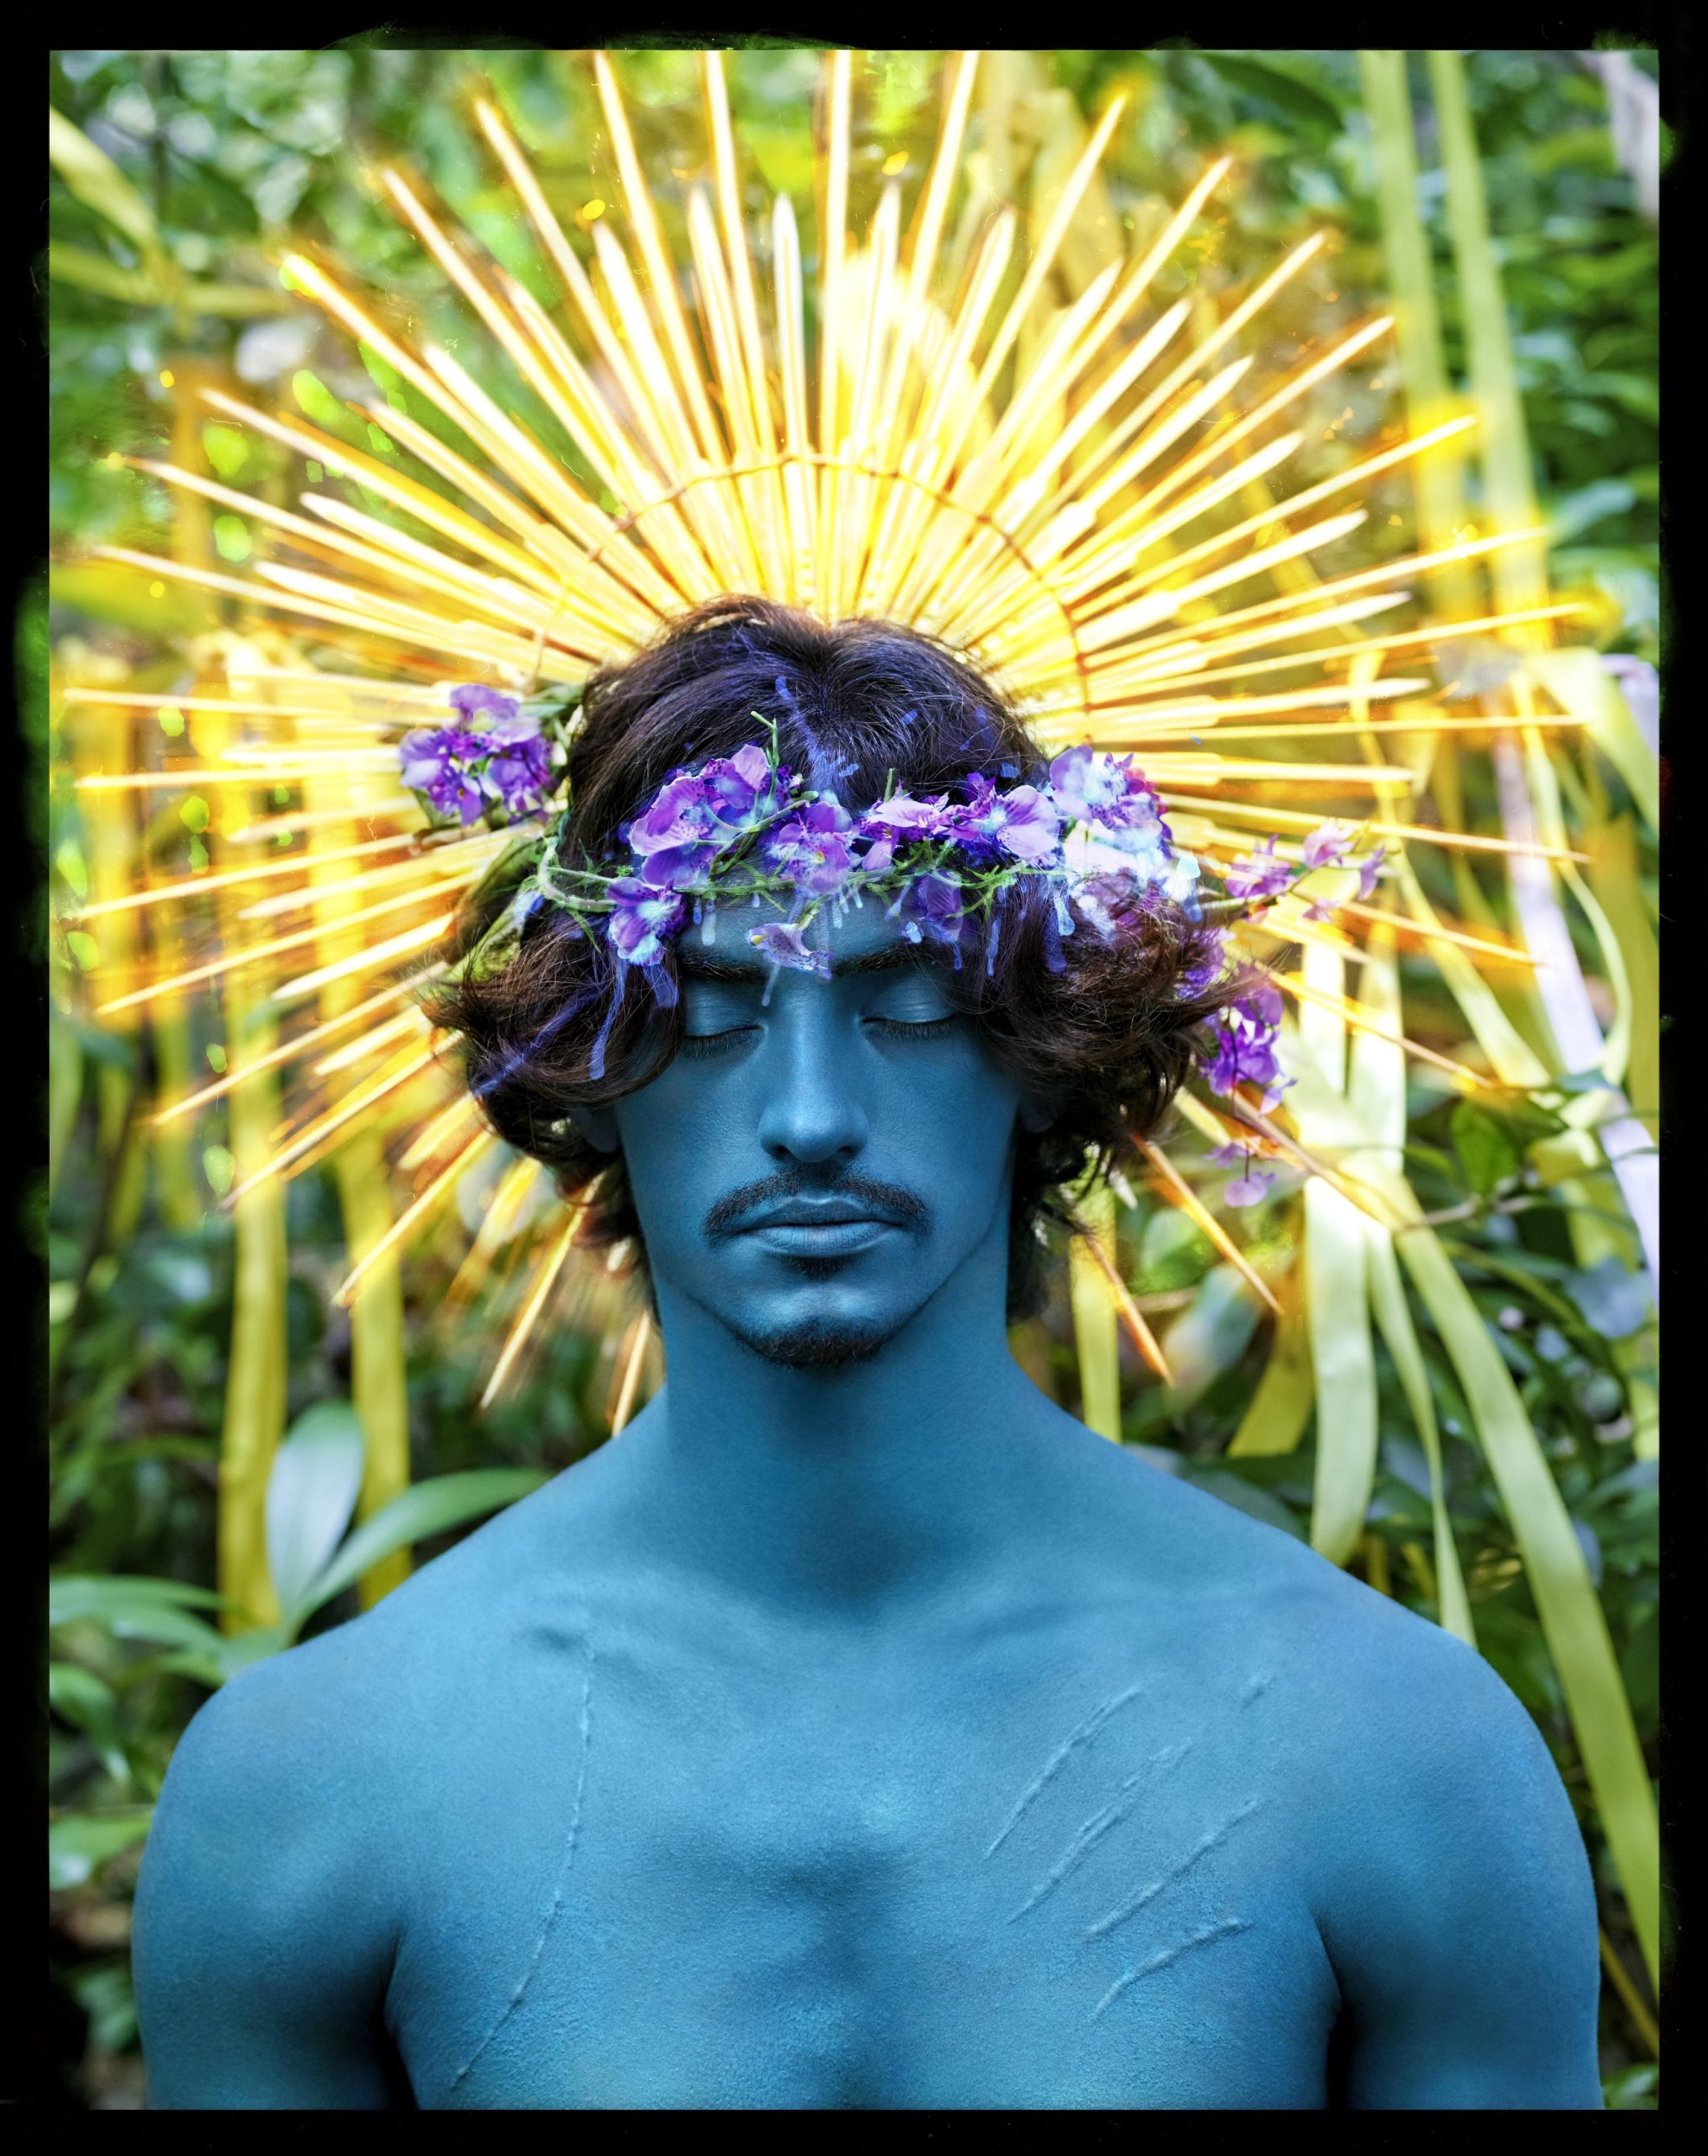 A photograph of a man covered in blue paint, wearing a purple flower crown that exudes light beams